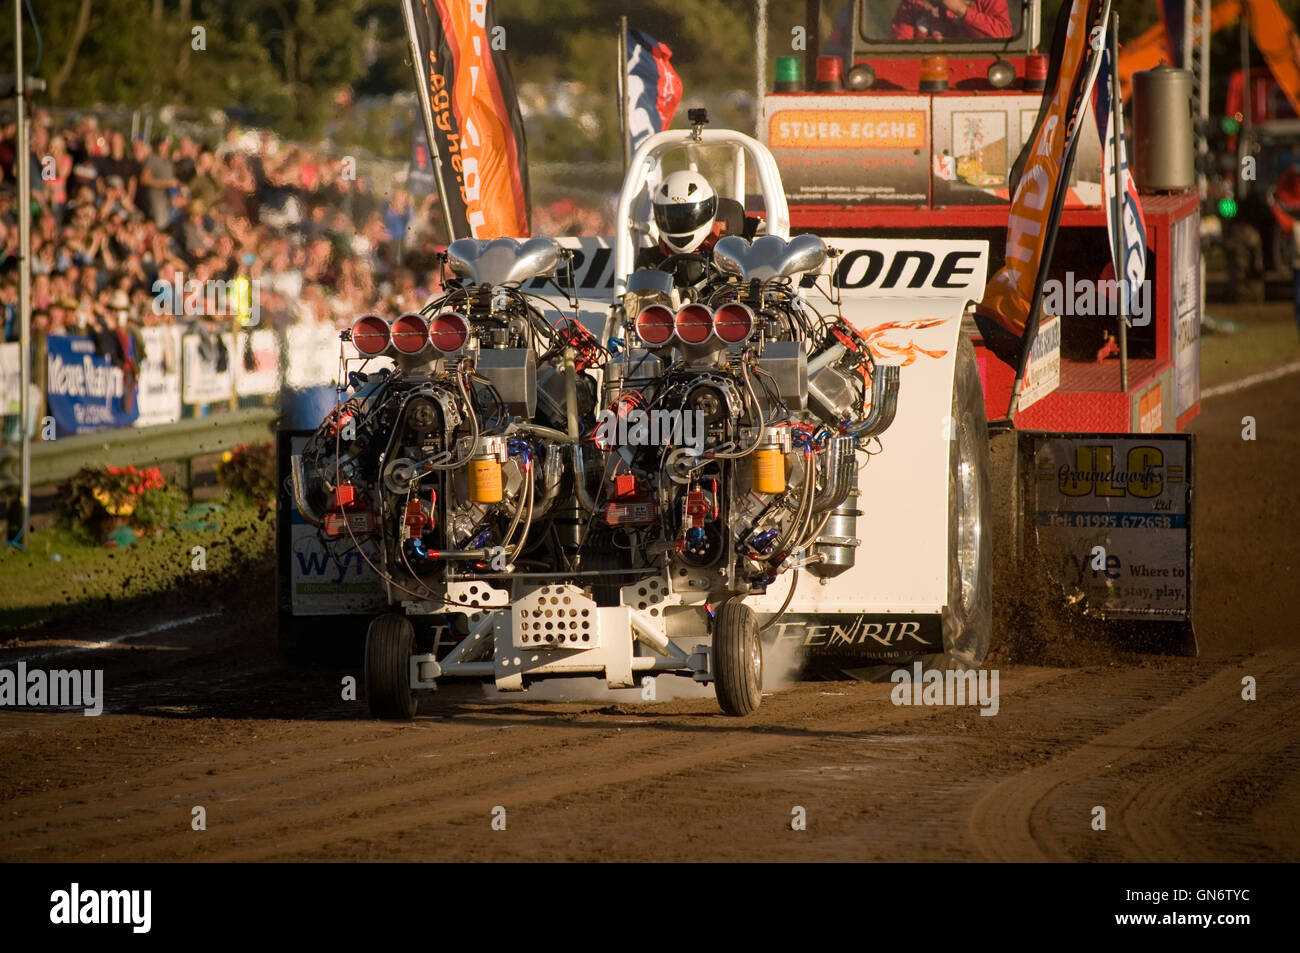 danish tractor pulling team competing with 4 V8 supercharged engines Stock Photo